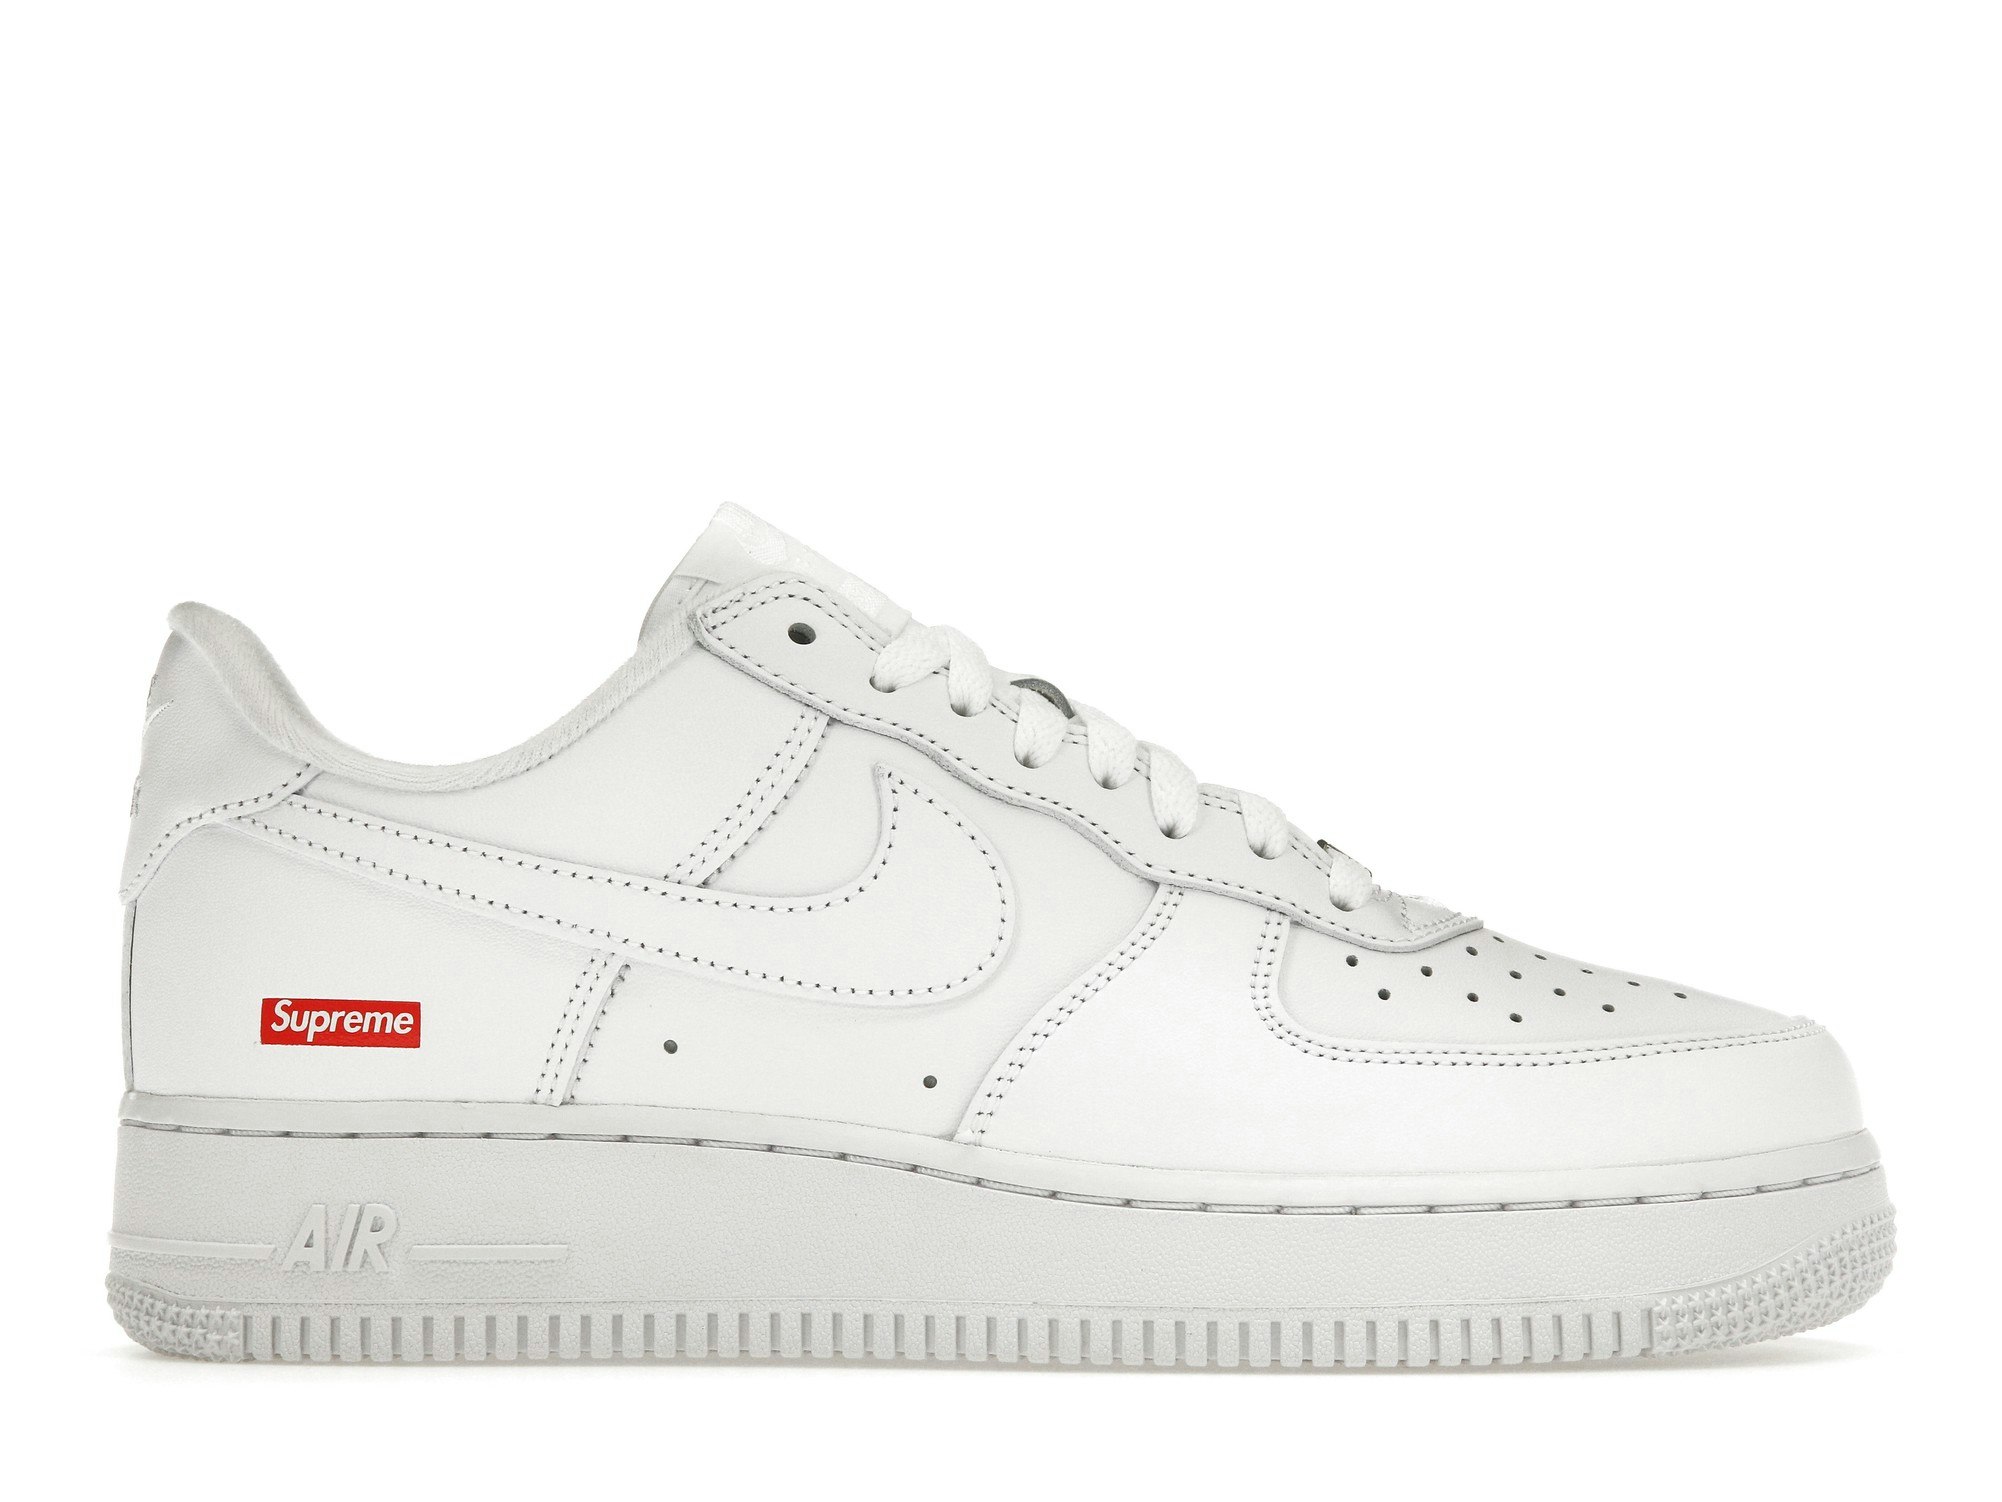 Air force 1 leather low trainers Nike x Supreme White size 41 EU in Leather  - 37014714